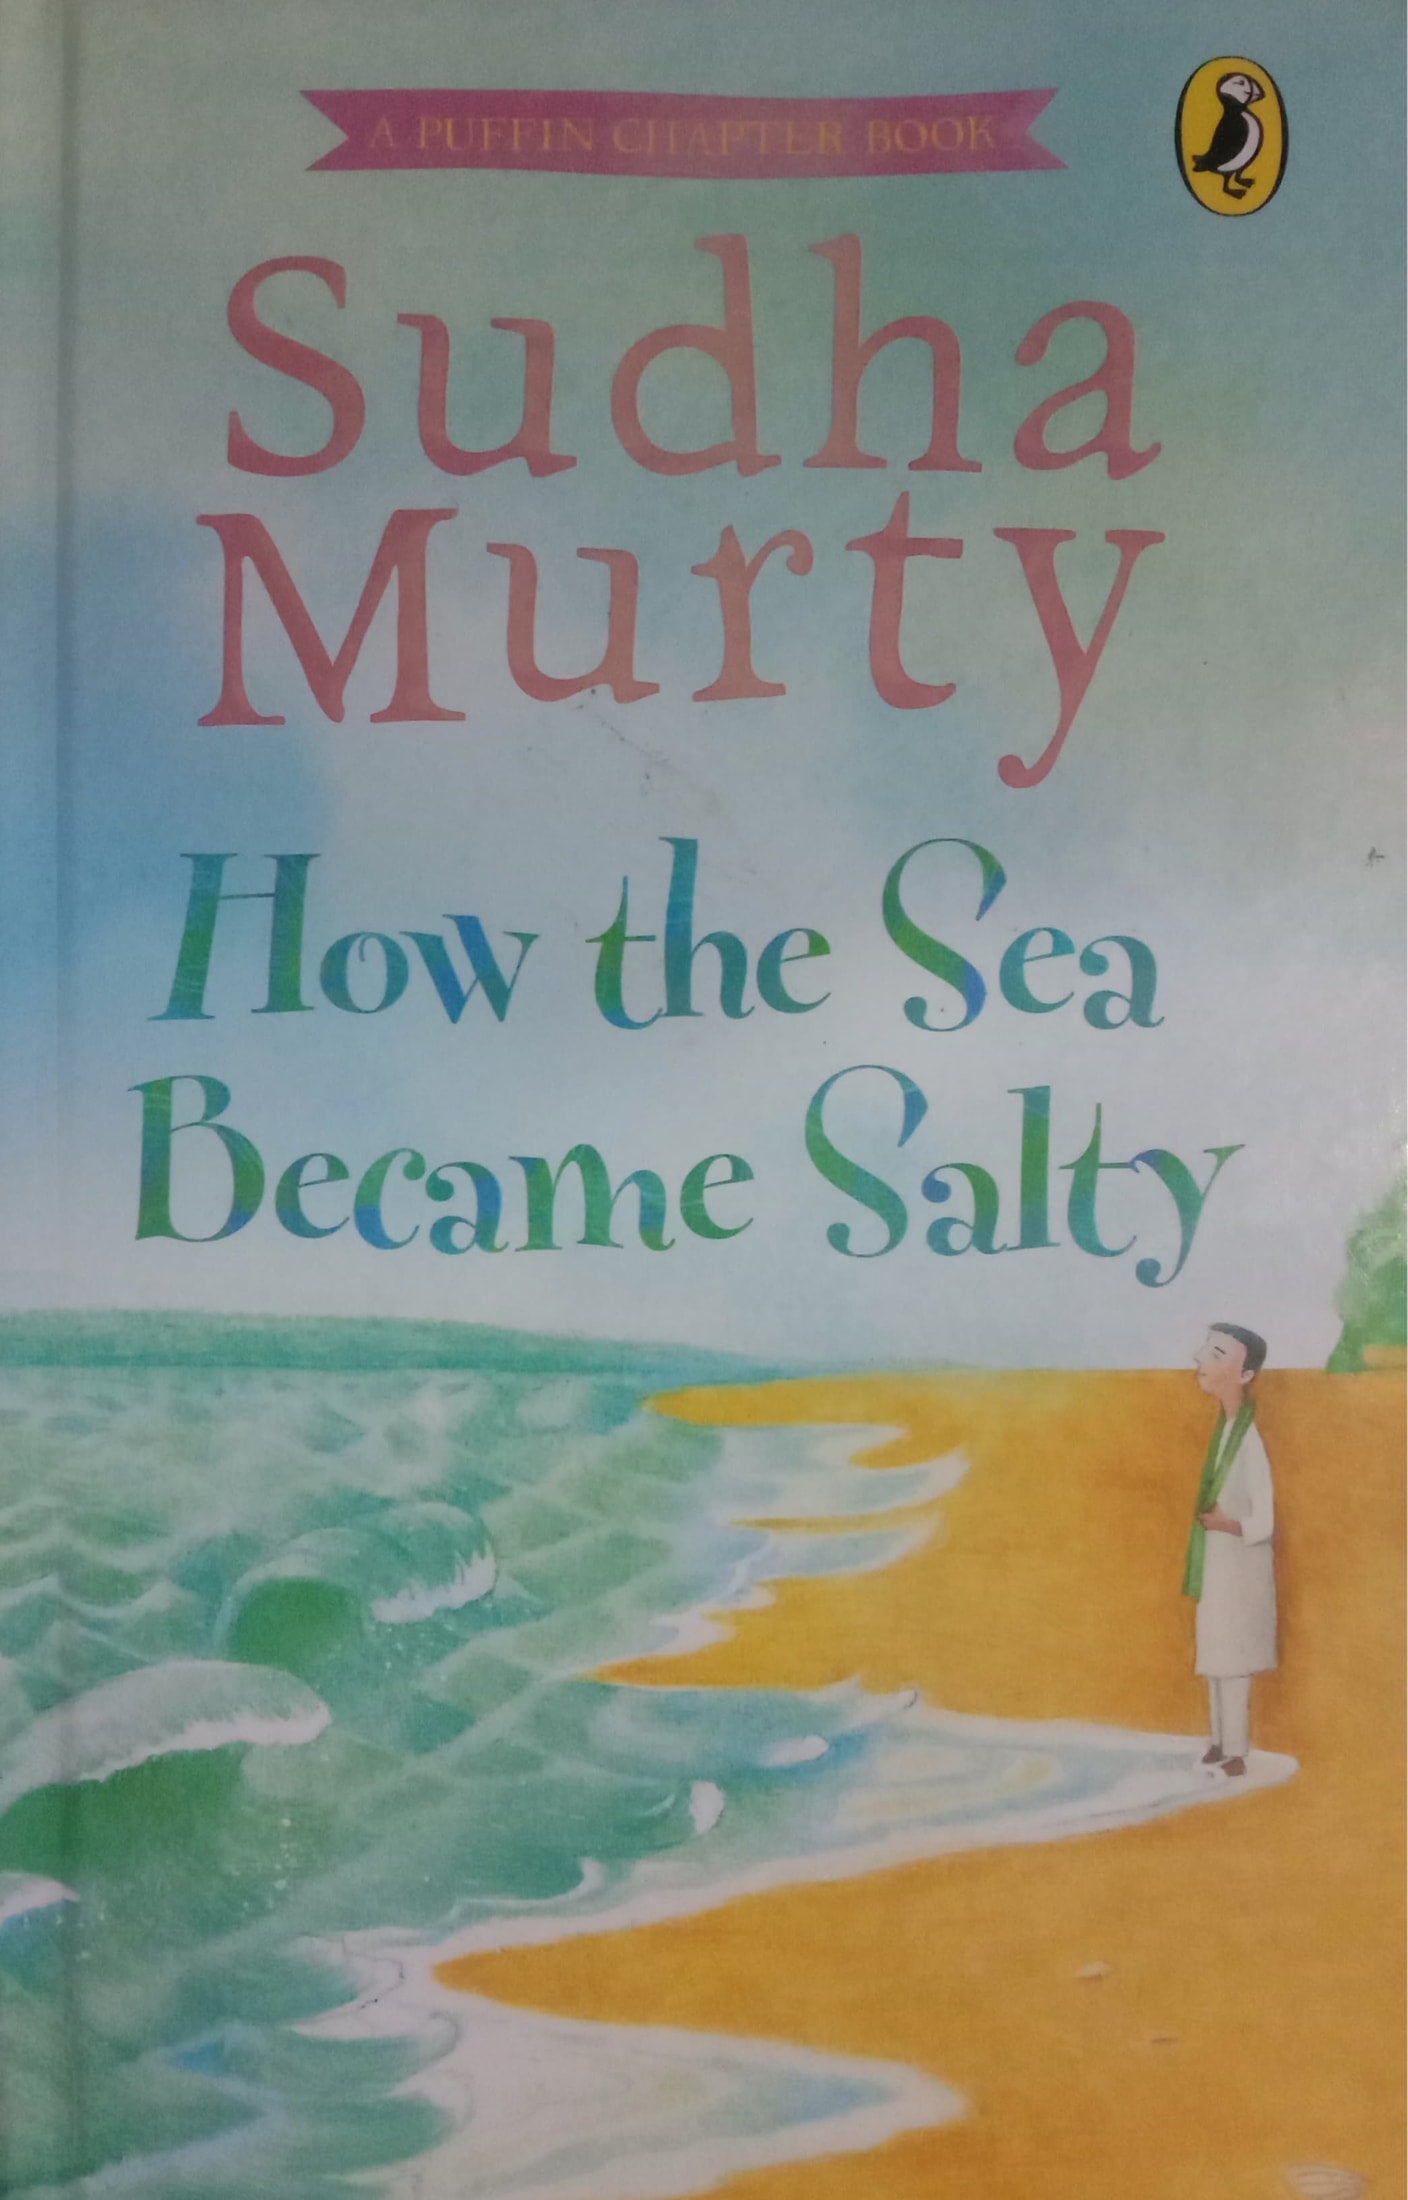 Sudha Murthy's how the sea became salty